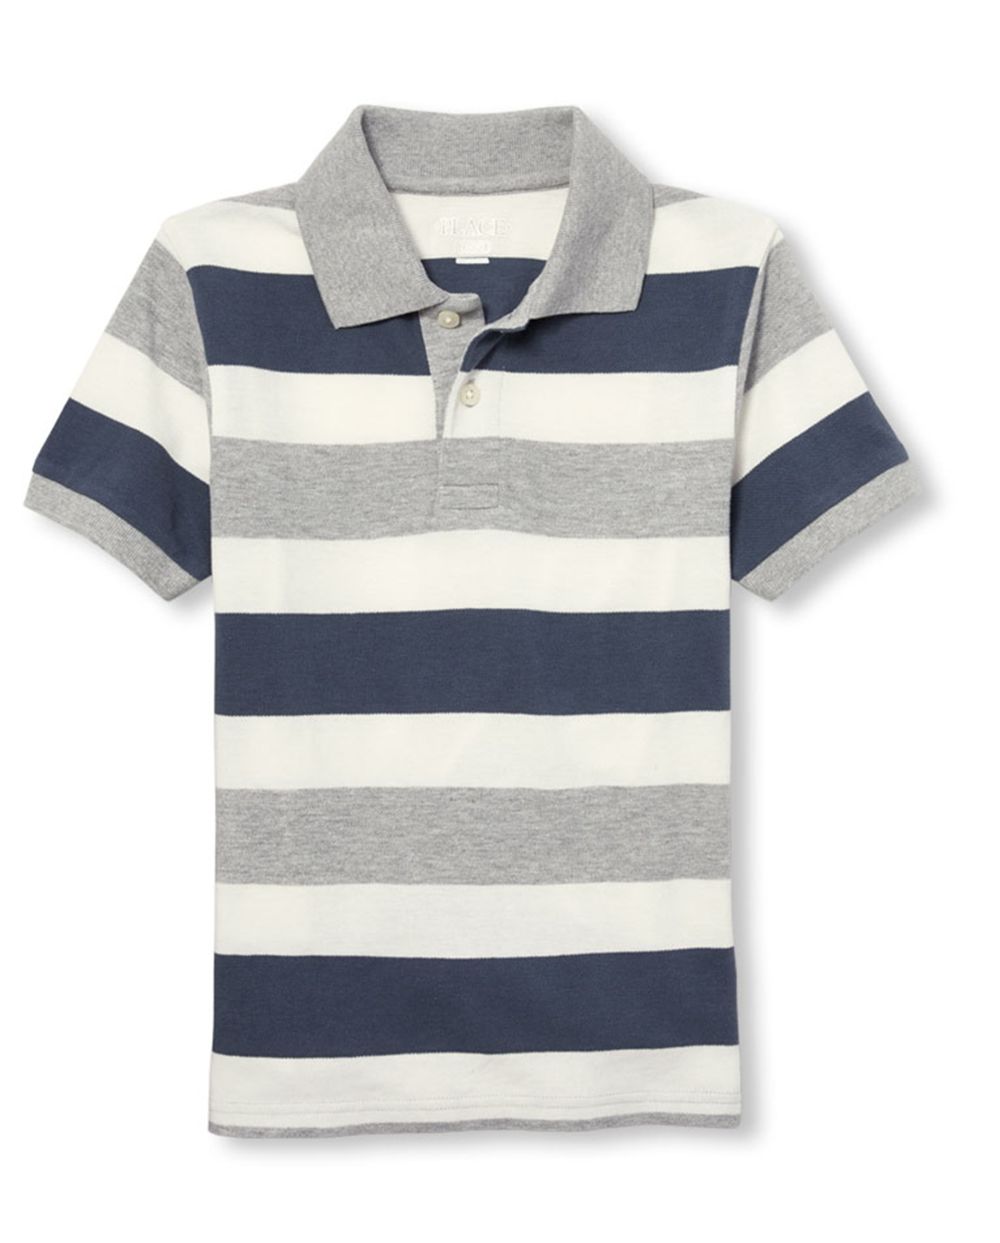 Boys Short Sleeve Rugby Striped Pique Polo